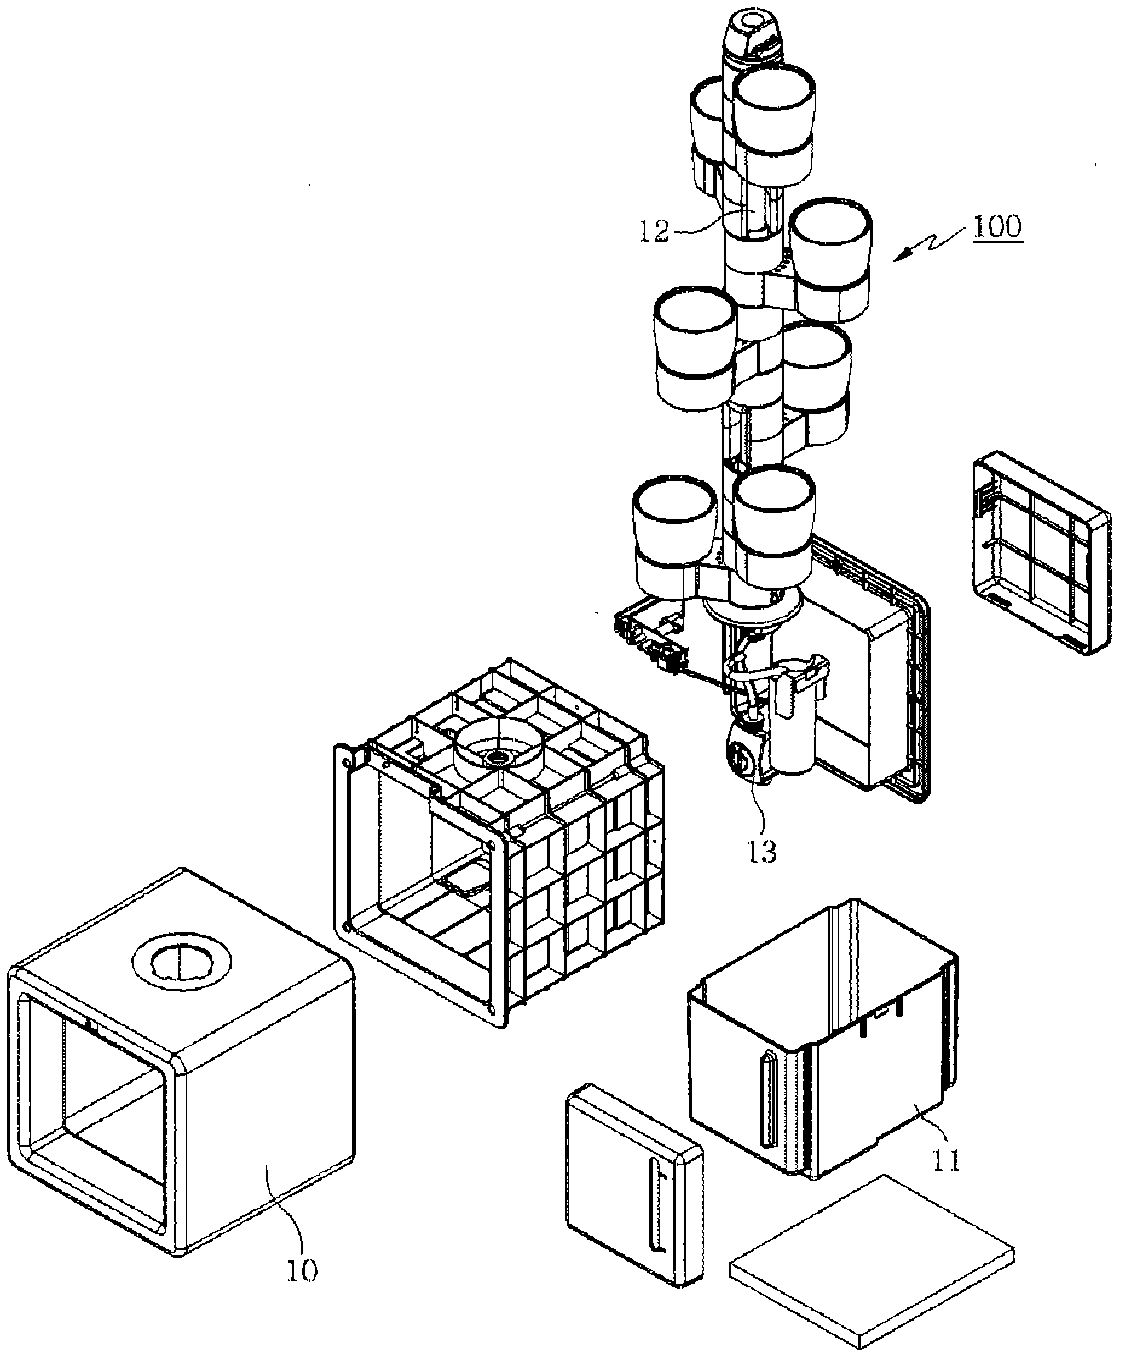 Water storage unit having a multilayer structure allowing plant cultivation